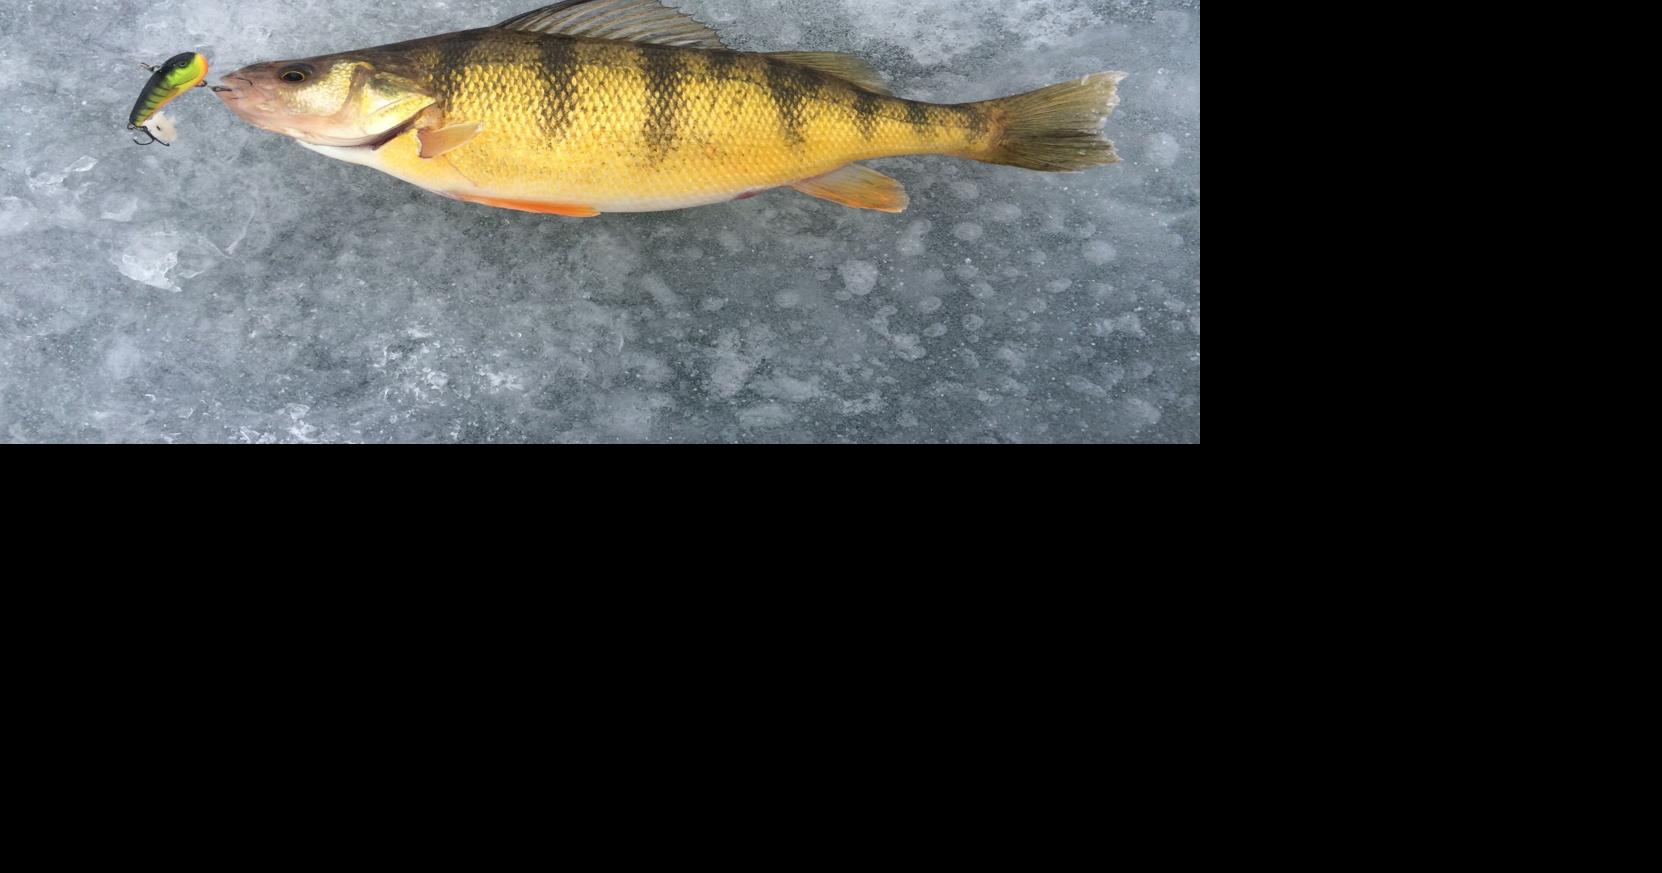 Hot ice fishing at C.J. Strike: Cold snap brings a rare treat for anglers